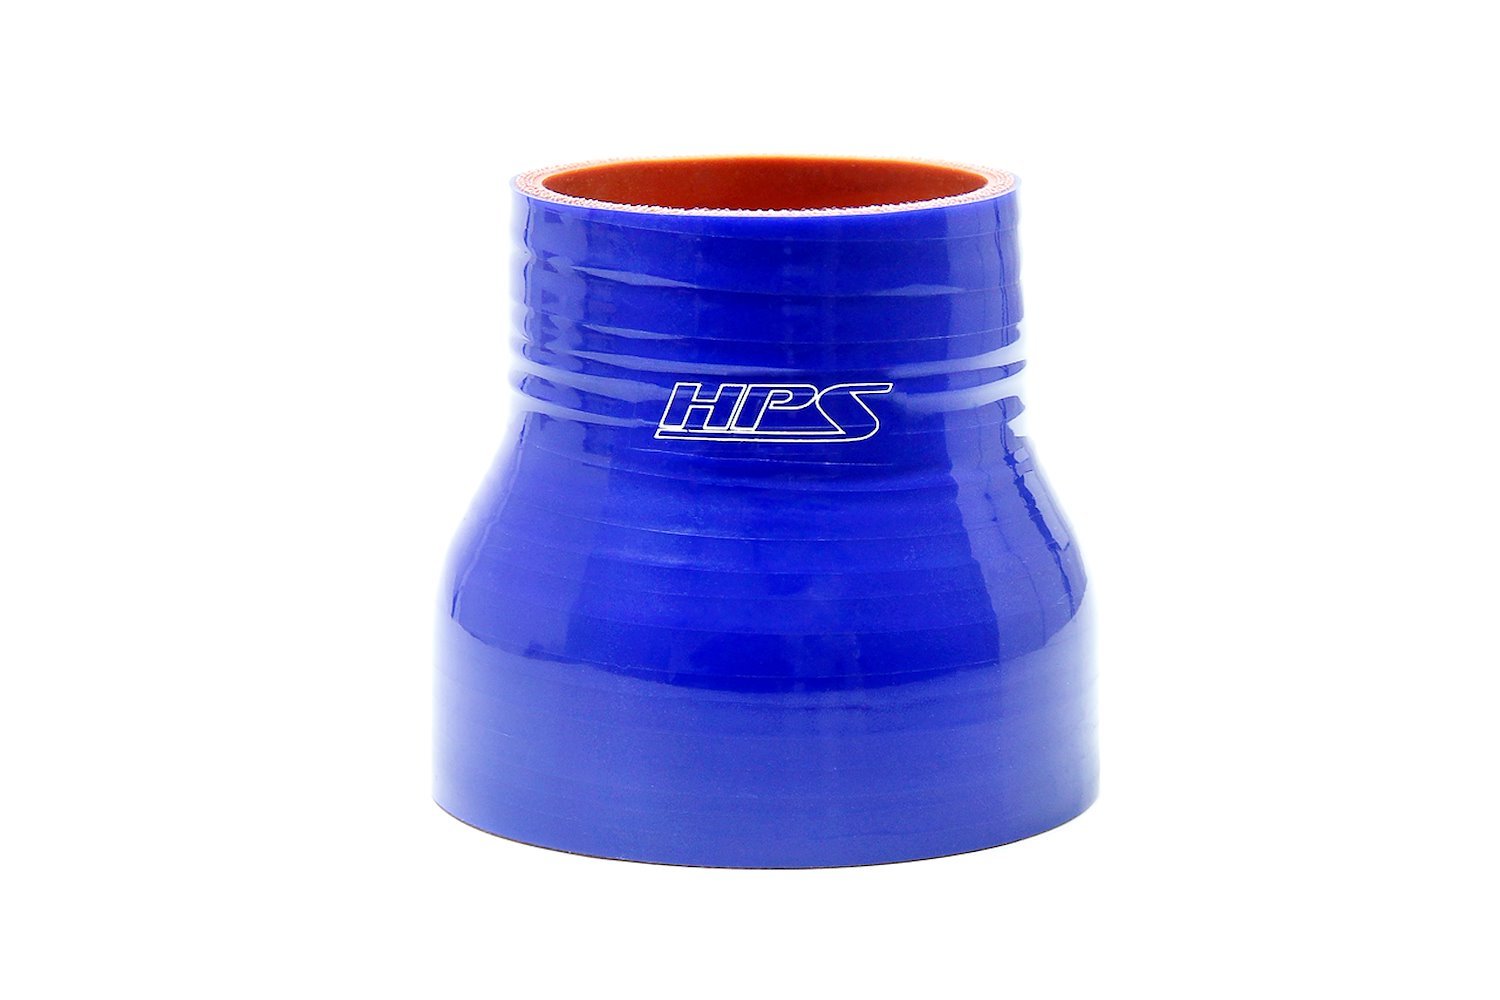 HTSR-225-350-BLUE Silicone Reducer Hose, High-Temp 4-Ply Reinforced, 2-1/4 in. - 3-1/2 in. ID, 3 in. Long, Blue